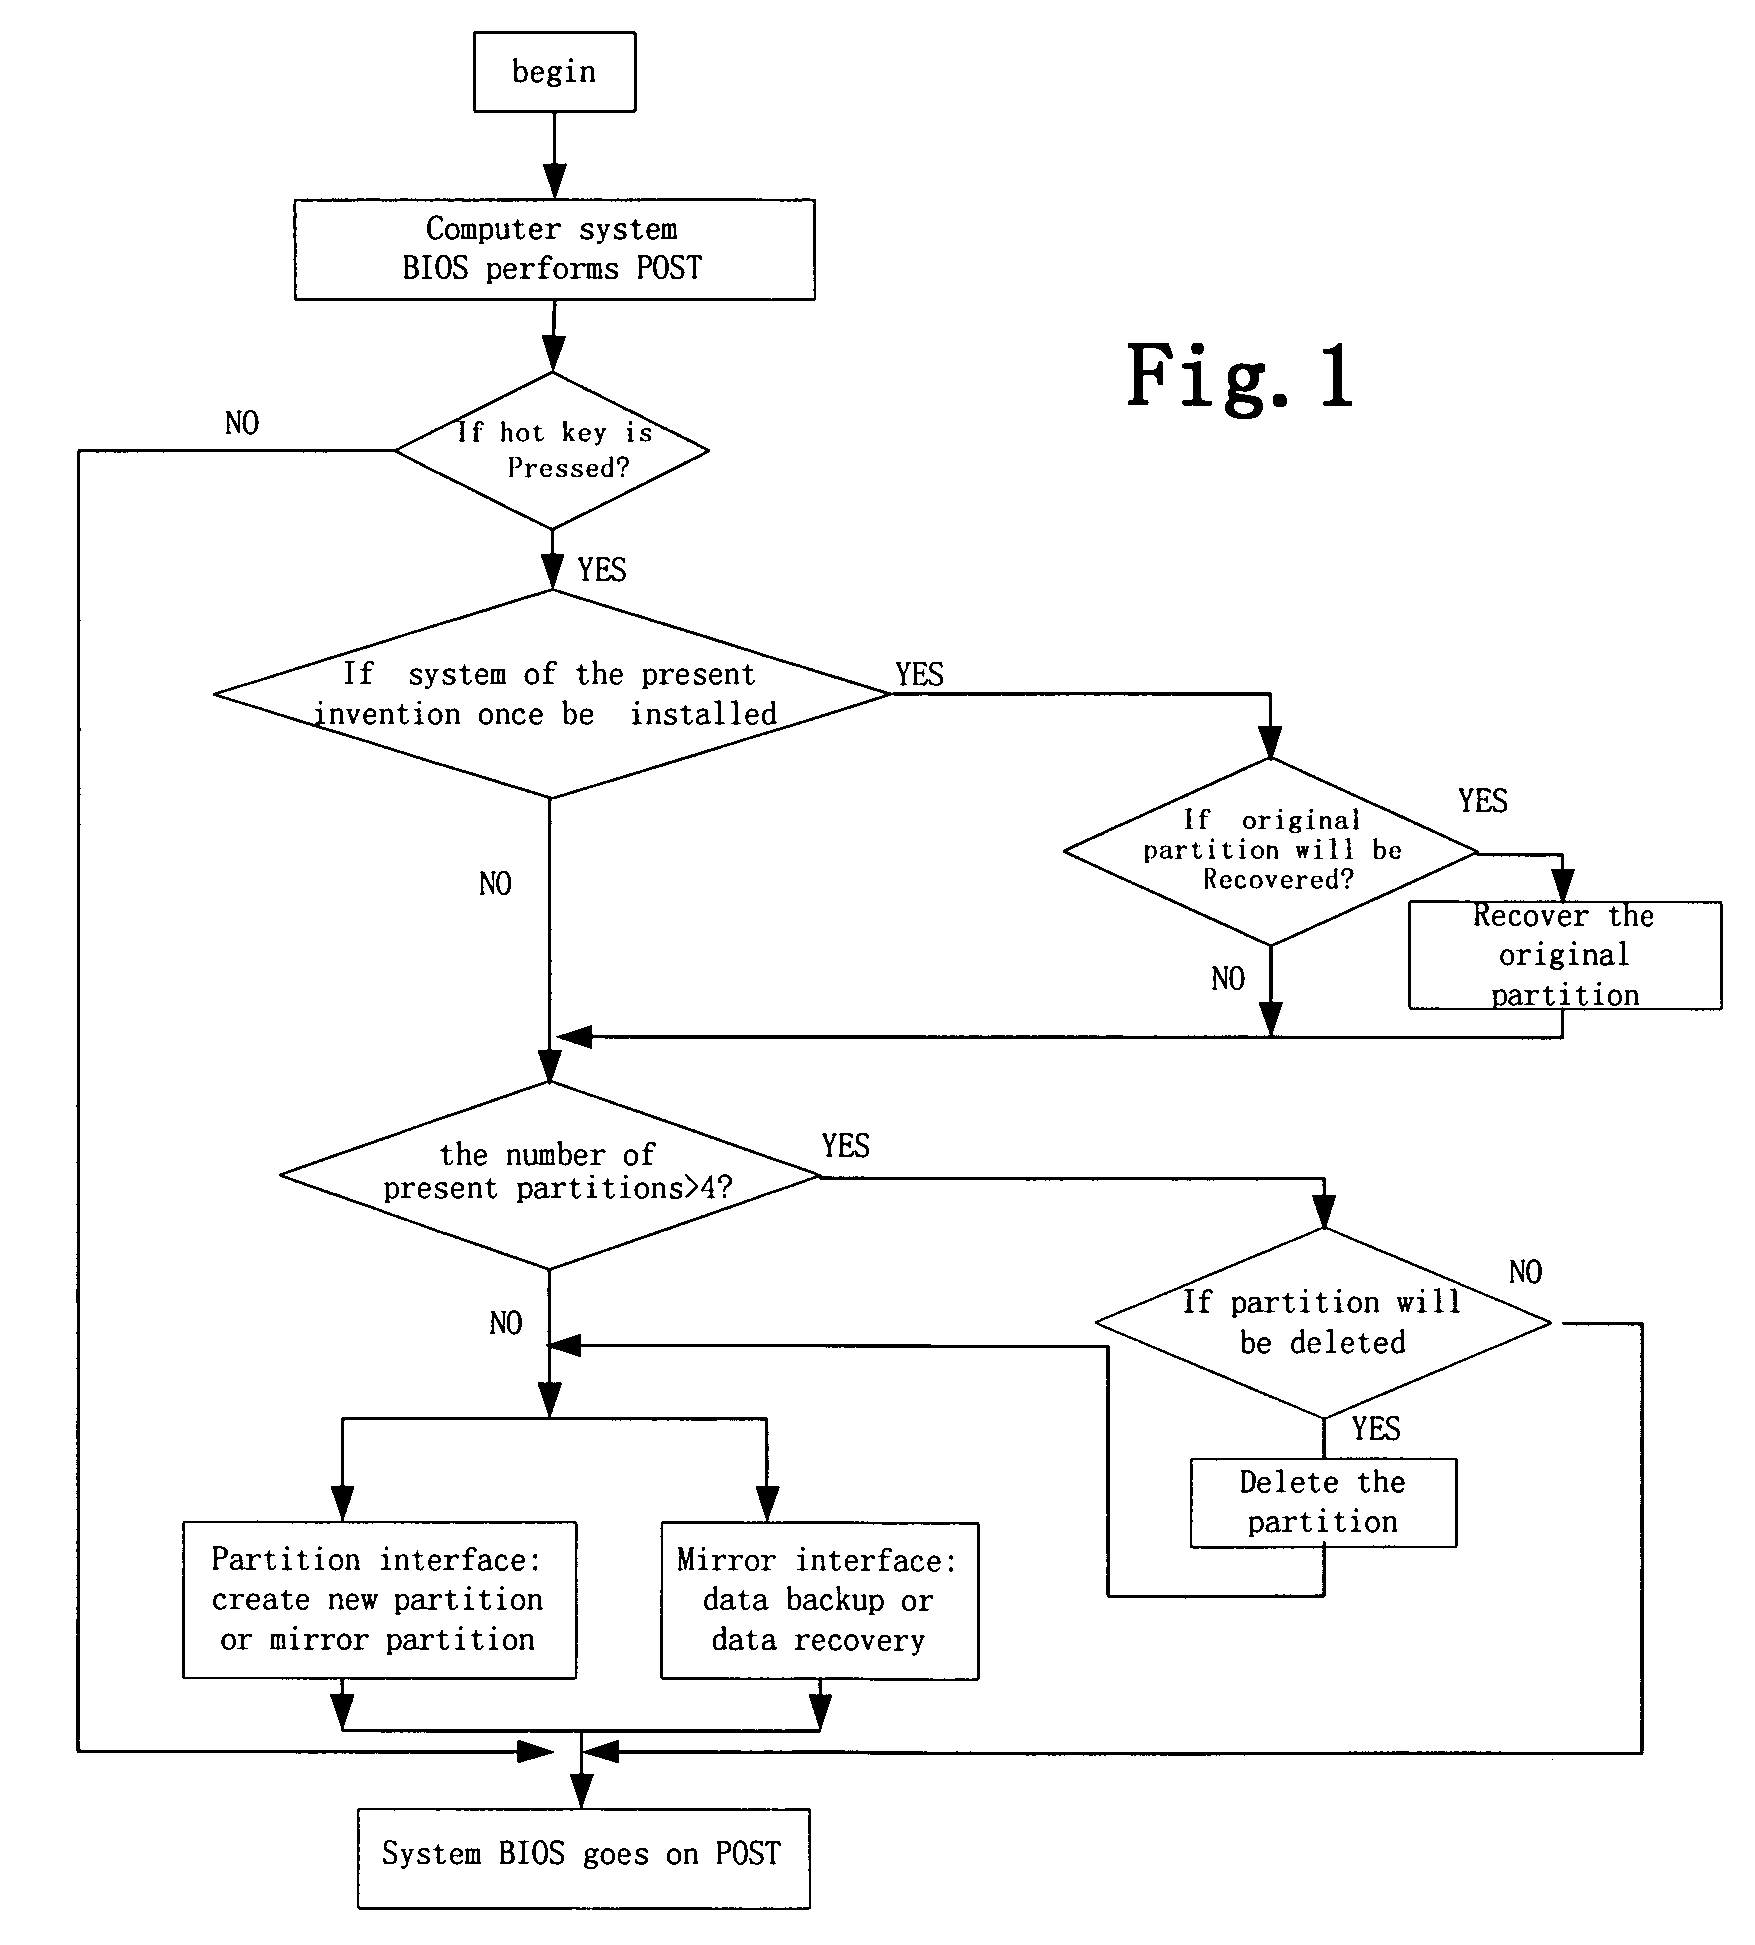 Method for backing up and recovering data in the hard disk of a computer